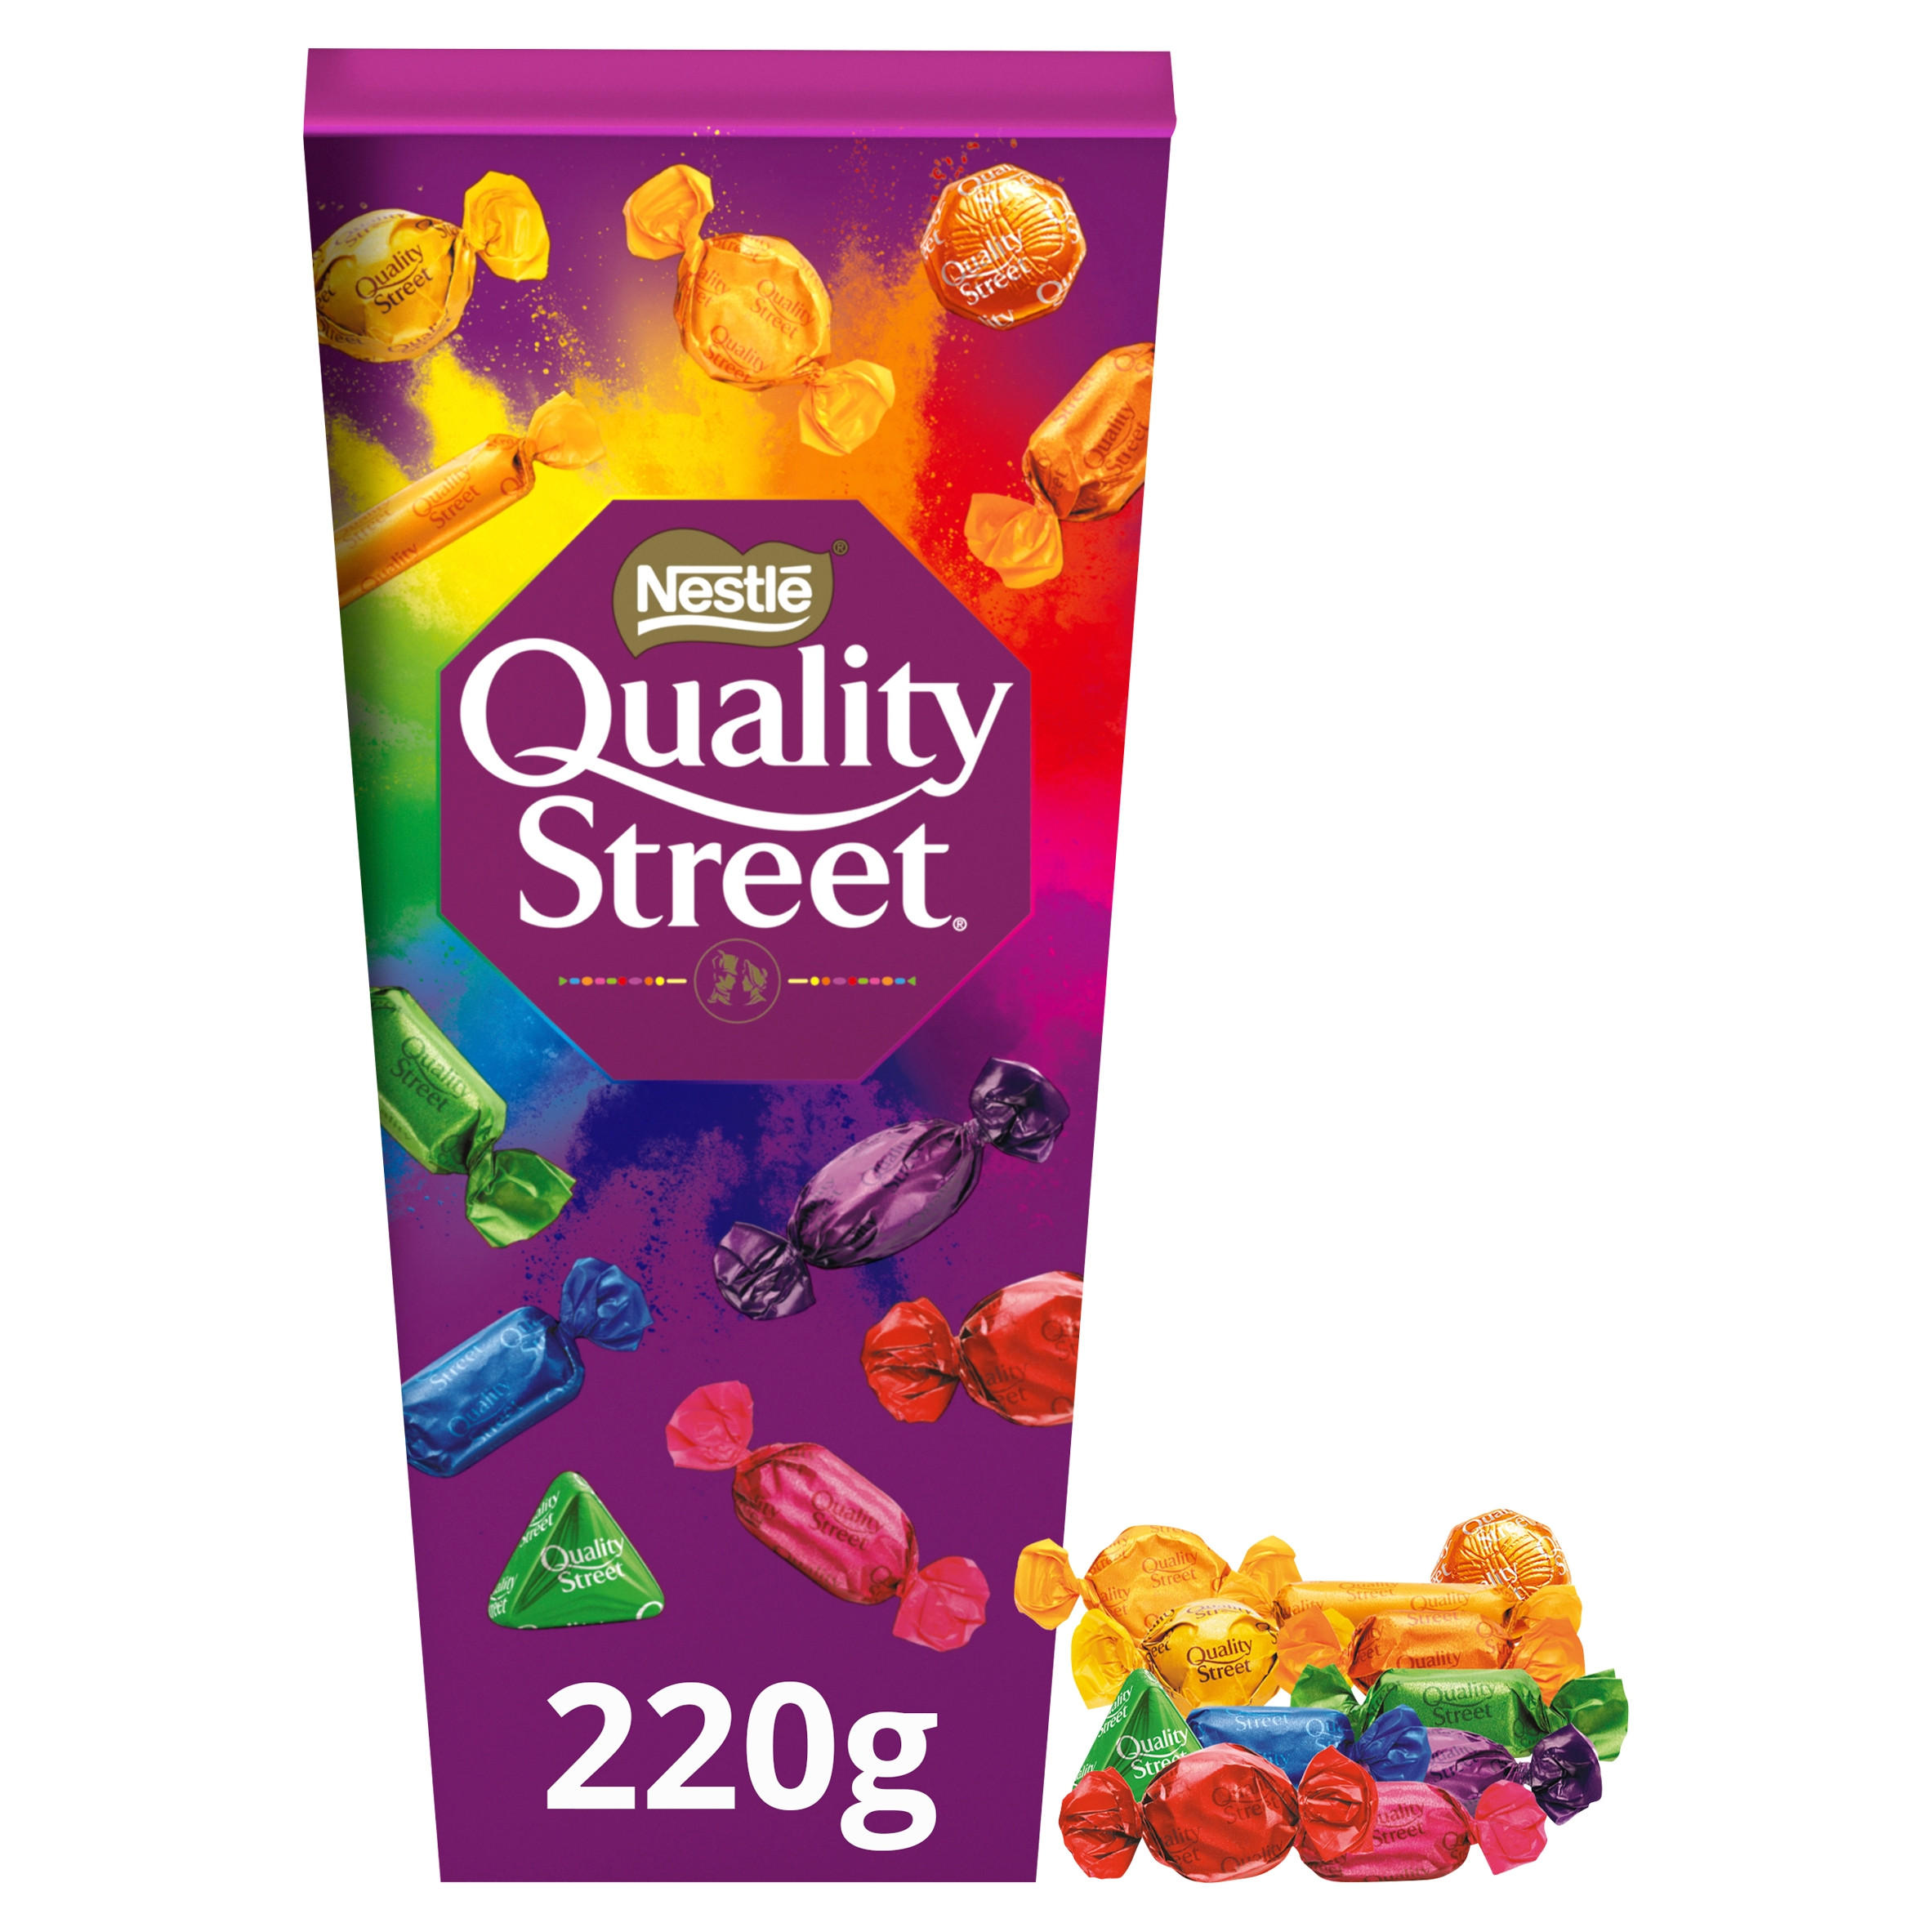 Quality Street 220g, Chocolate Boxes & Gifts